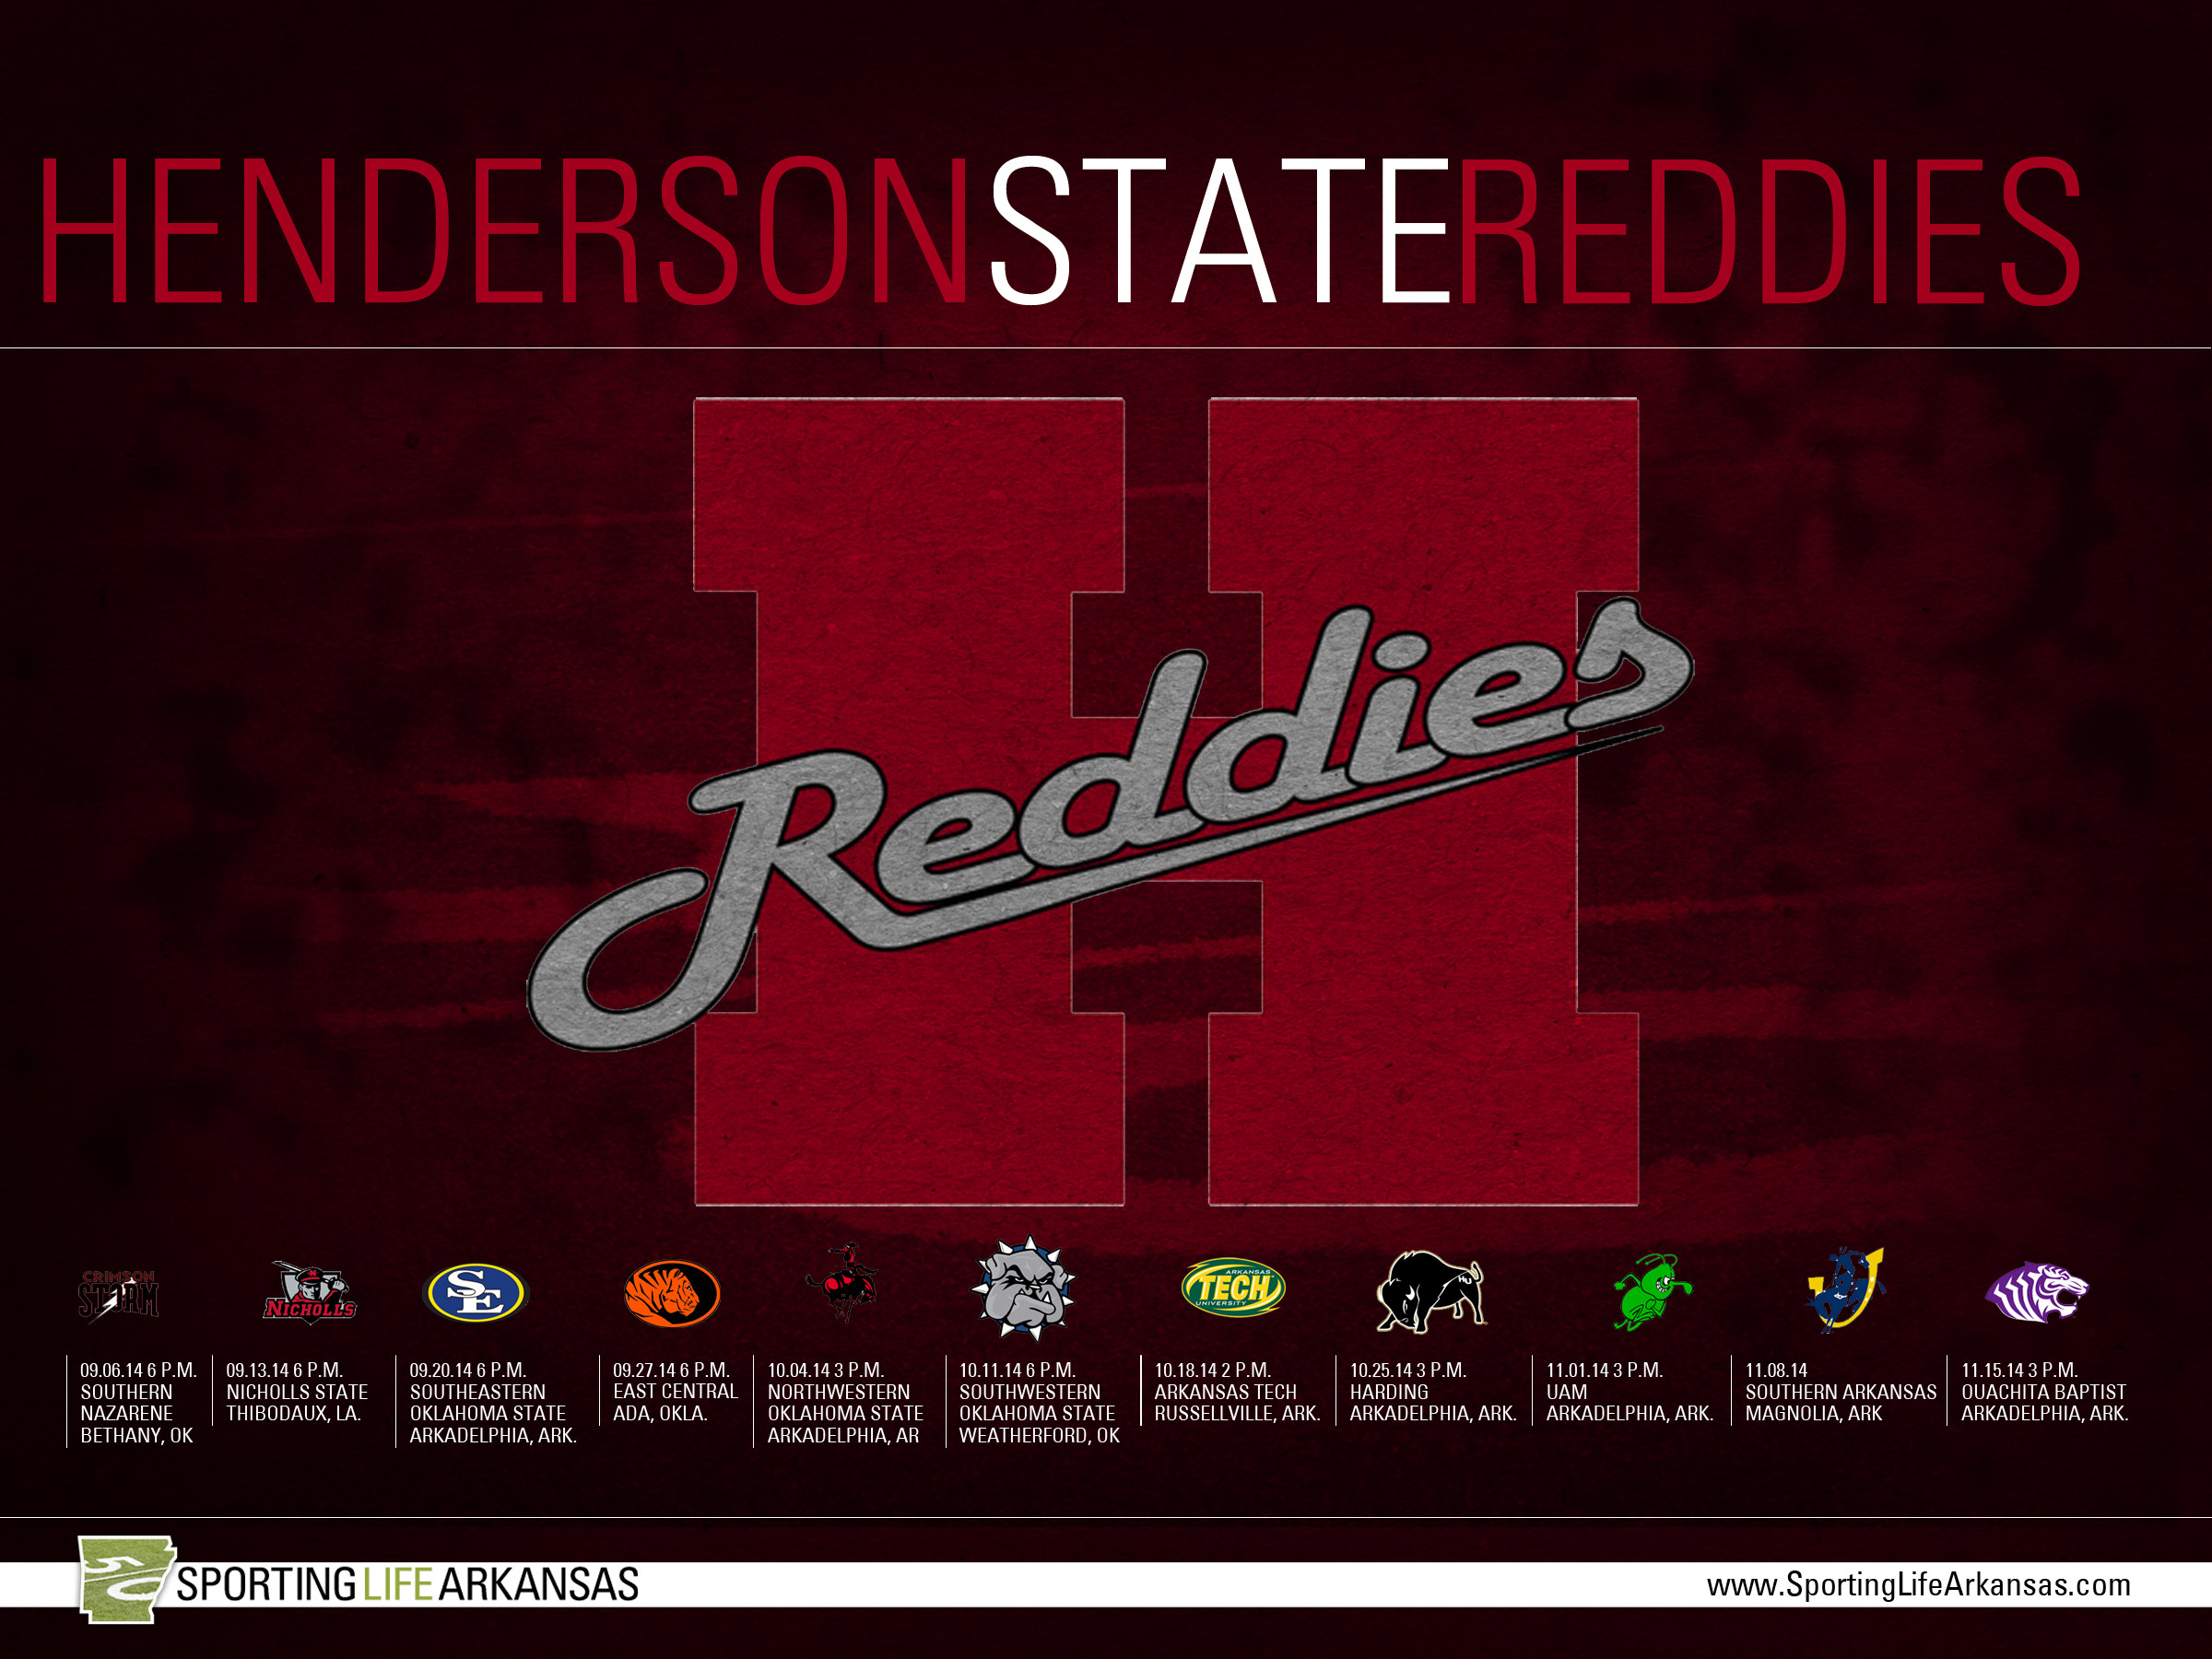 2014 Arkansas State Red Wolves Football Schedule Wallpaper 2014 Henderson State Reddies Football Schedule Wallpapers